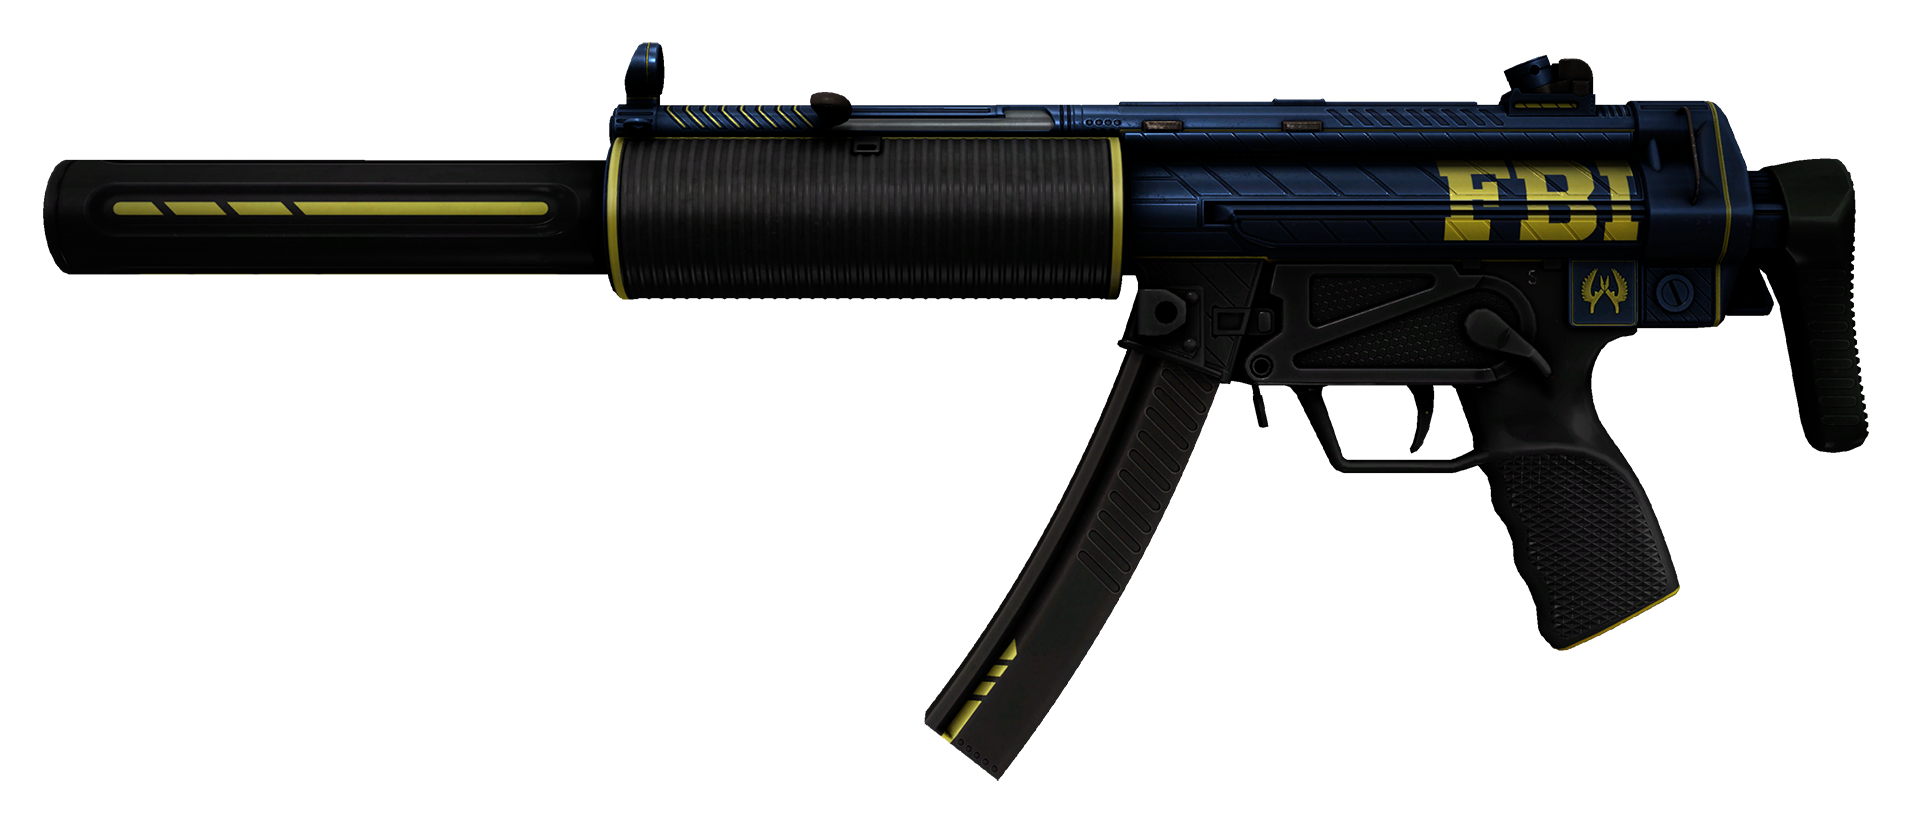 Solar MP5 cs go skin for android download